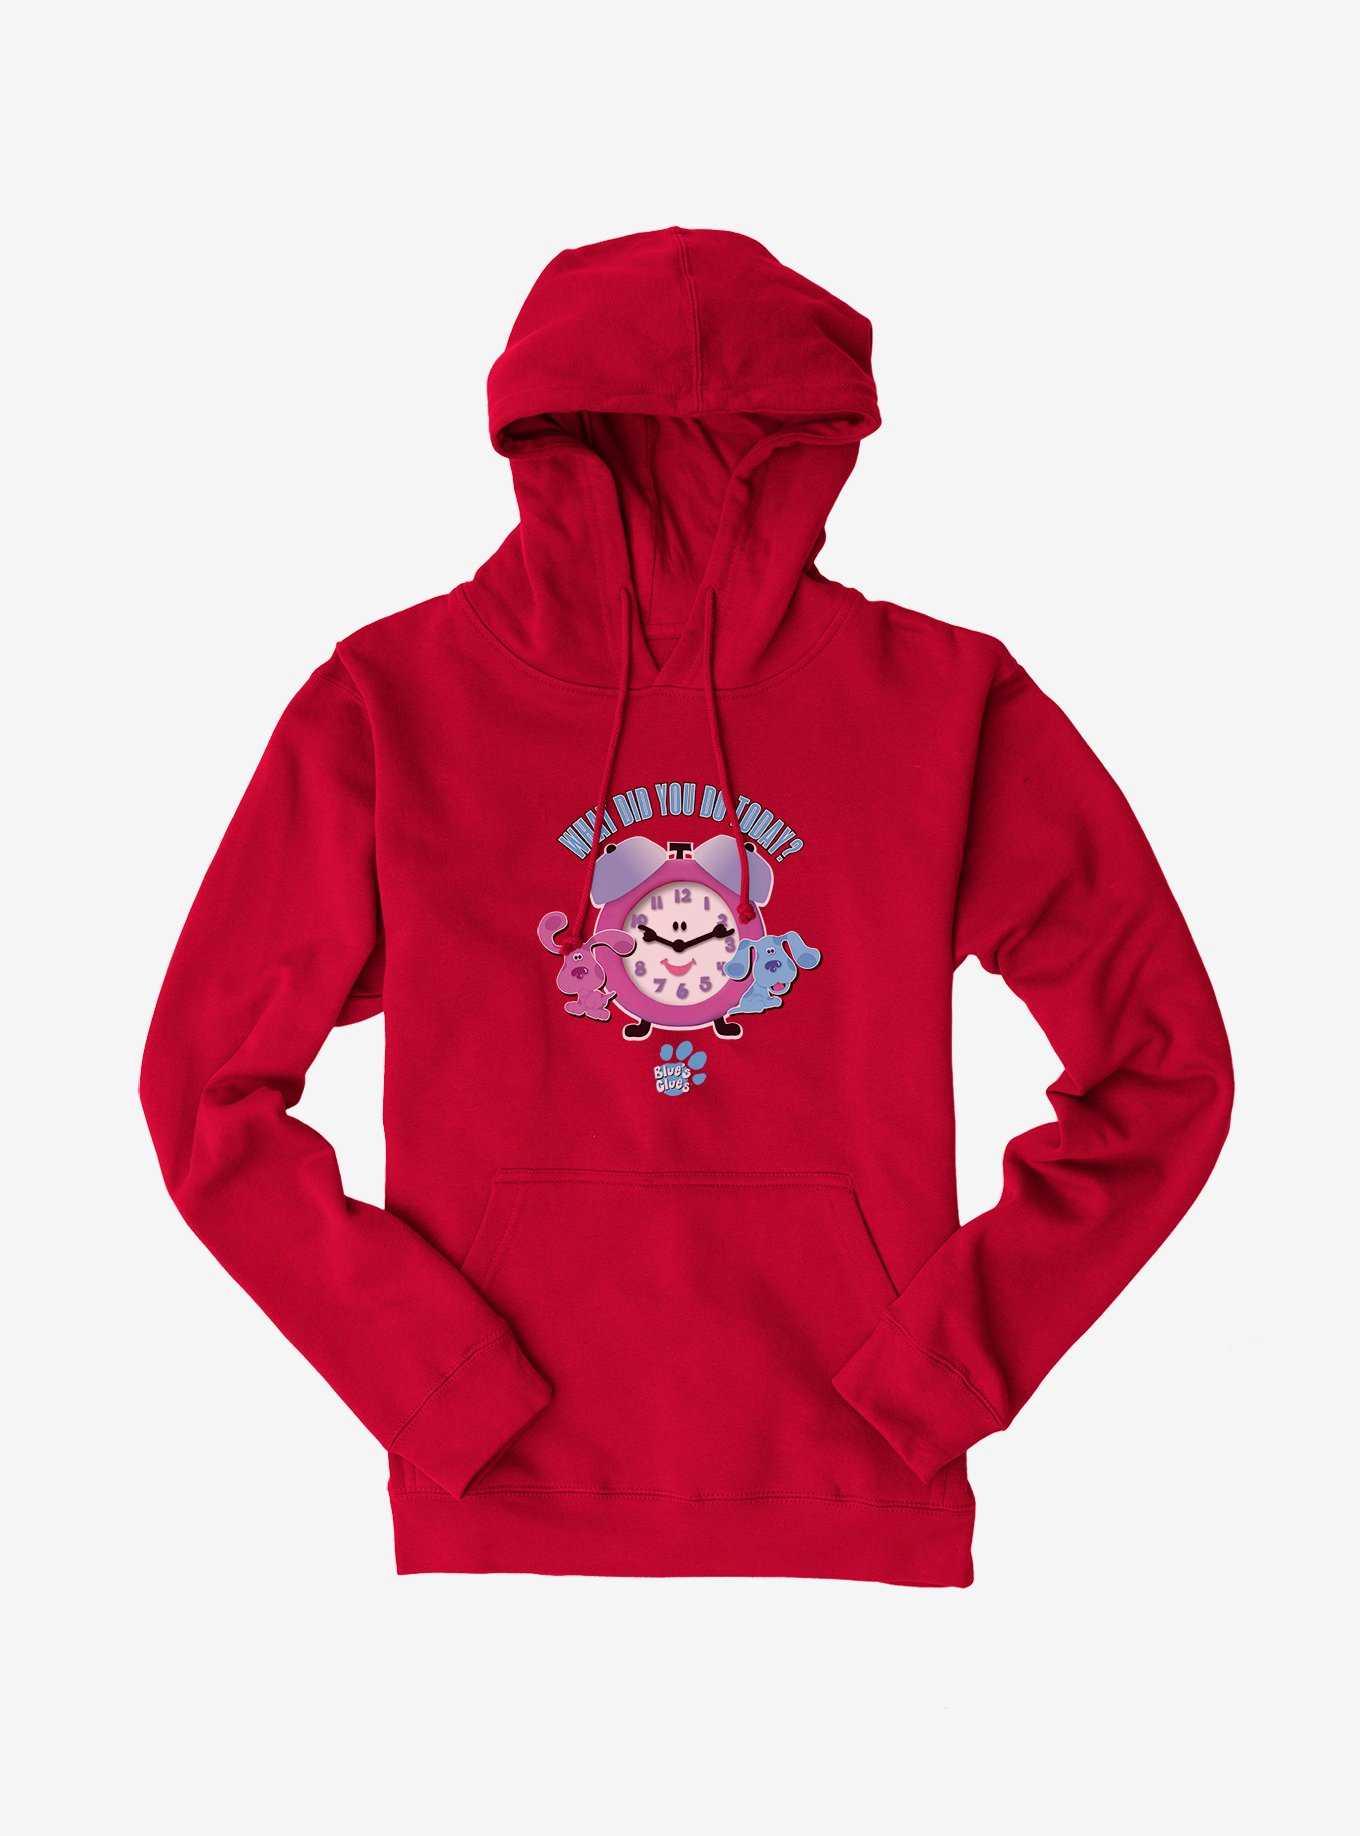 Blue's Clues Tickety What Did You Do Today? Hoodie, , hi-res